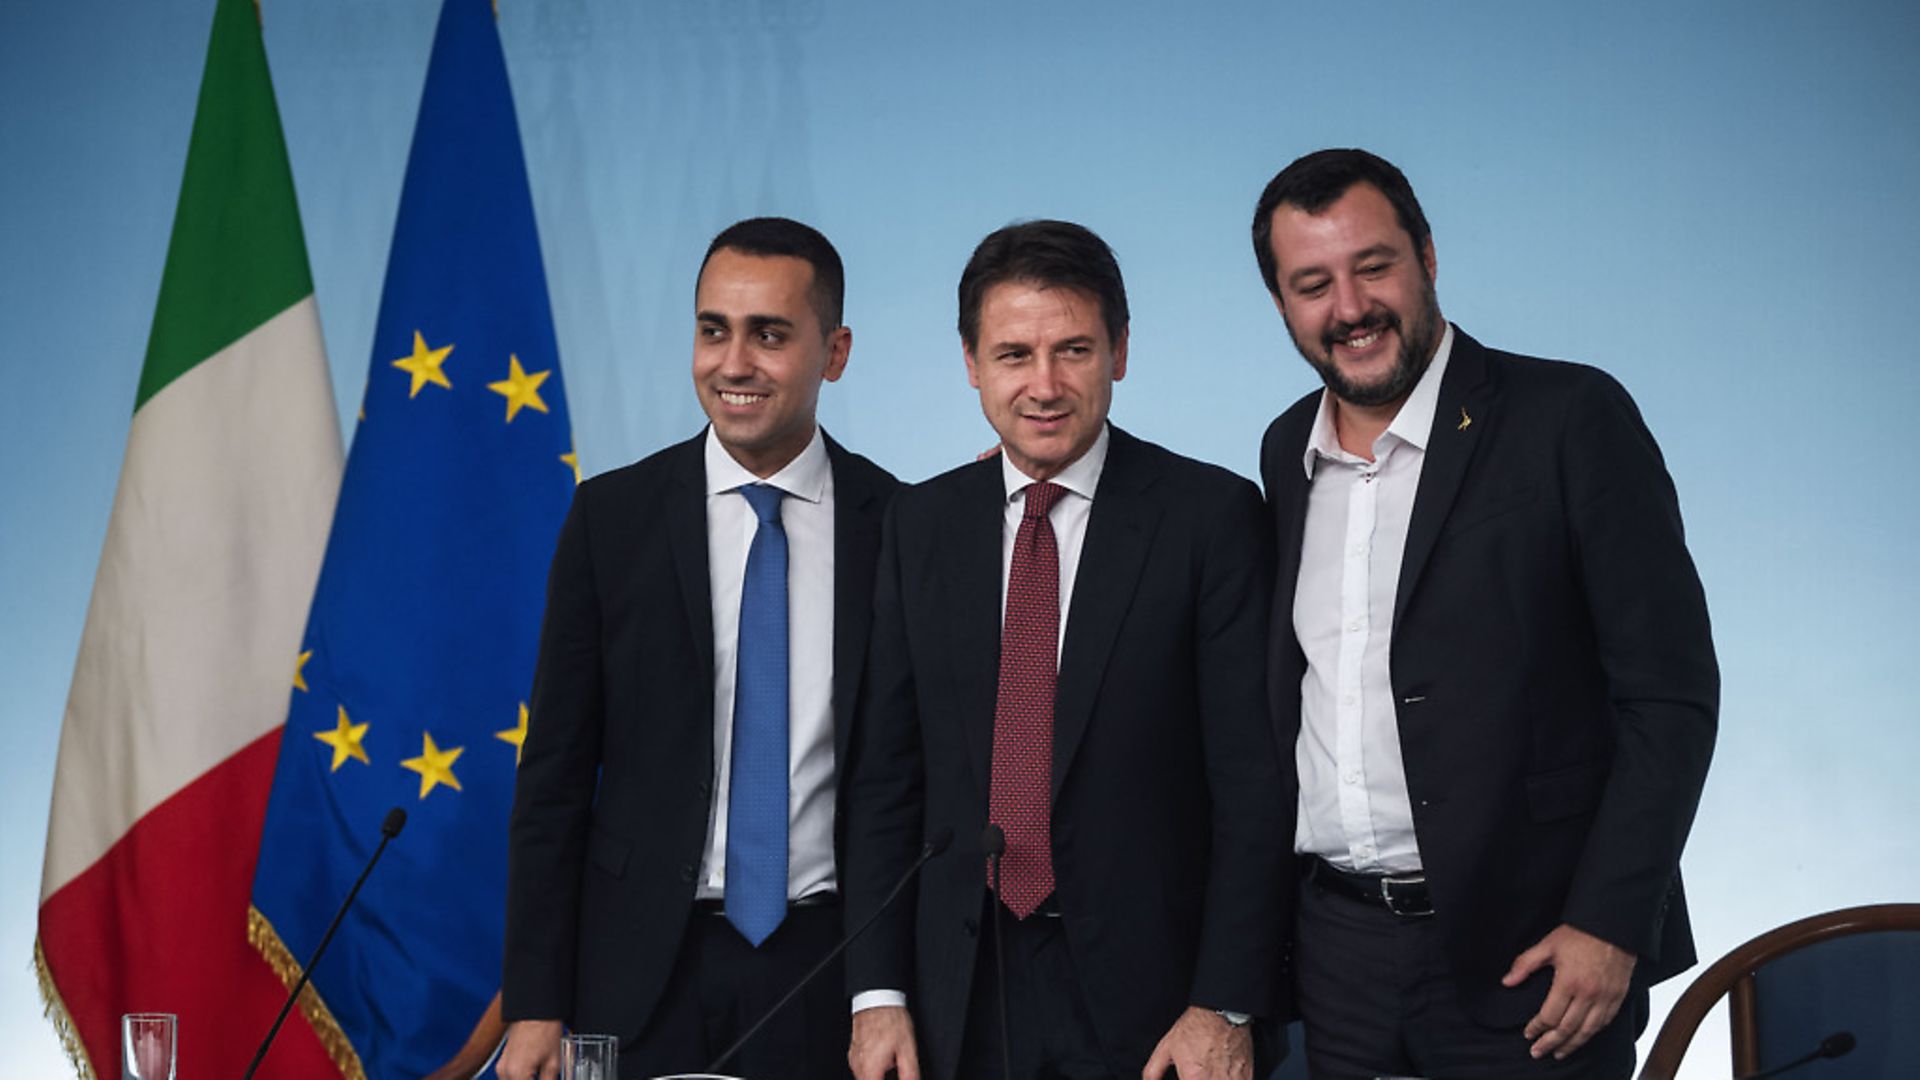 One of these men quit as Italy's prime minister this week - but which? (Question four) (Photo by Antonio Masiello/Getty Images) - Credit: Getty Images